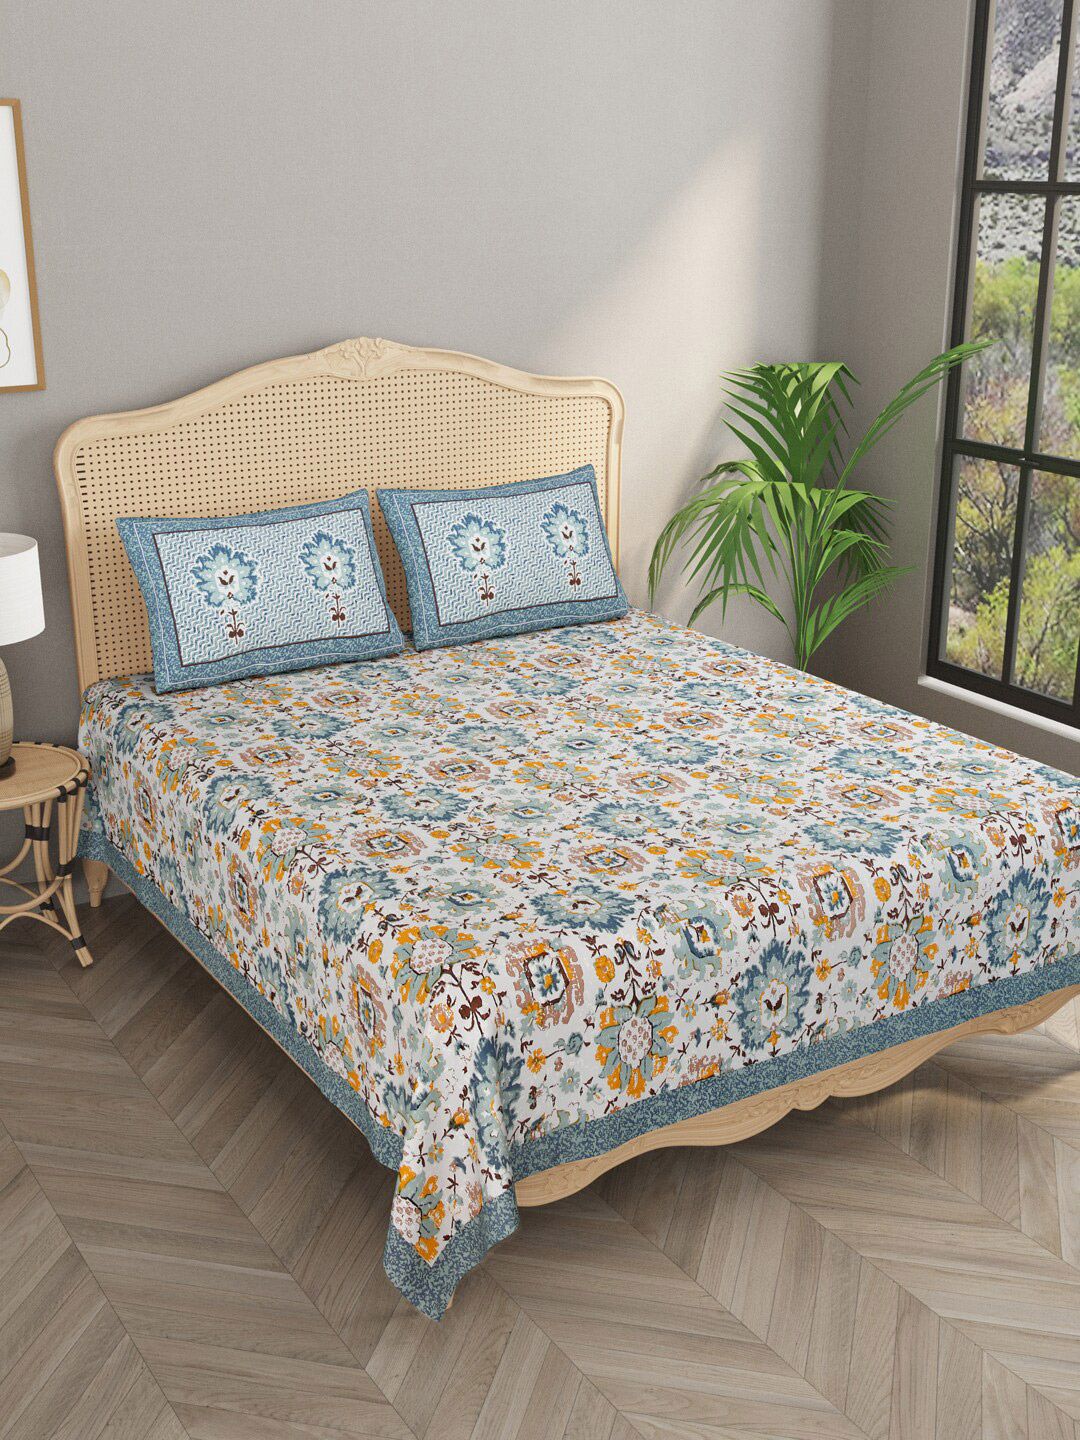 Gulaab Jaipur Floral 400 TC King Bedsheet with 2 Pillow Covers Price in India